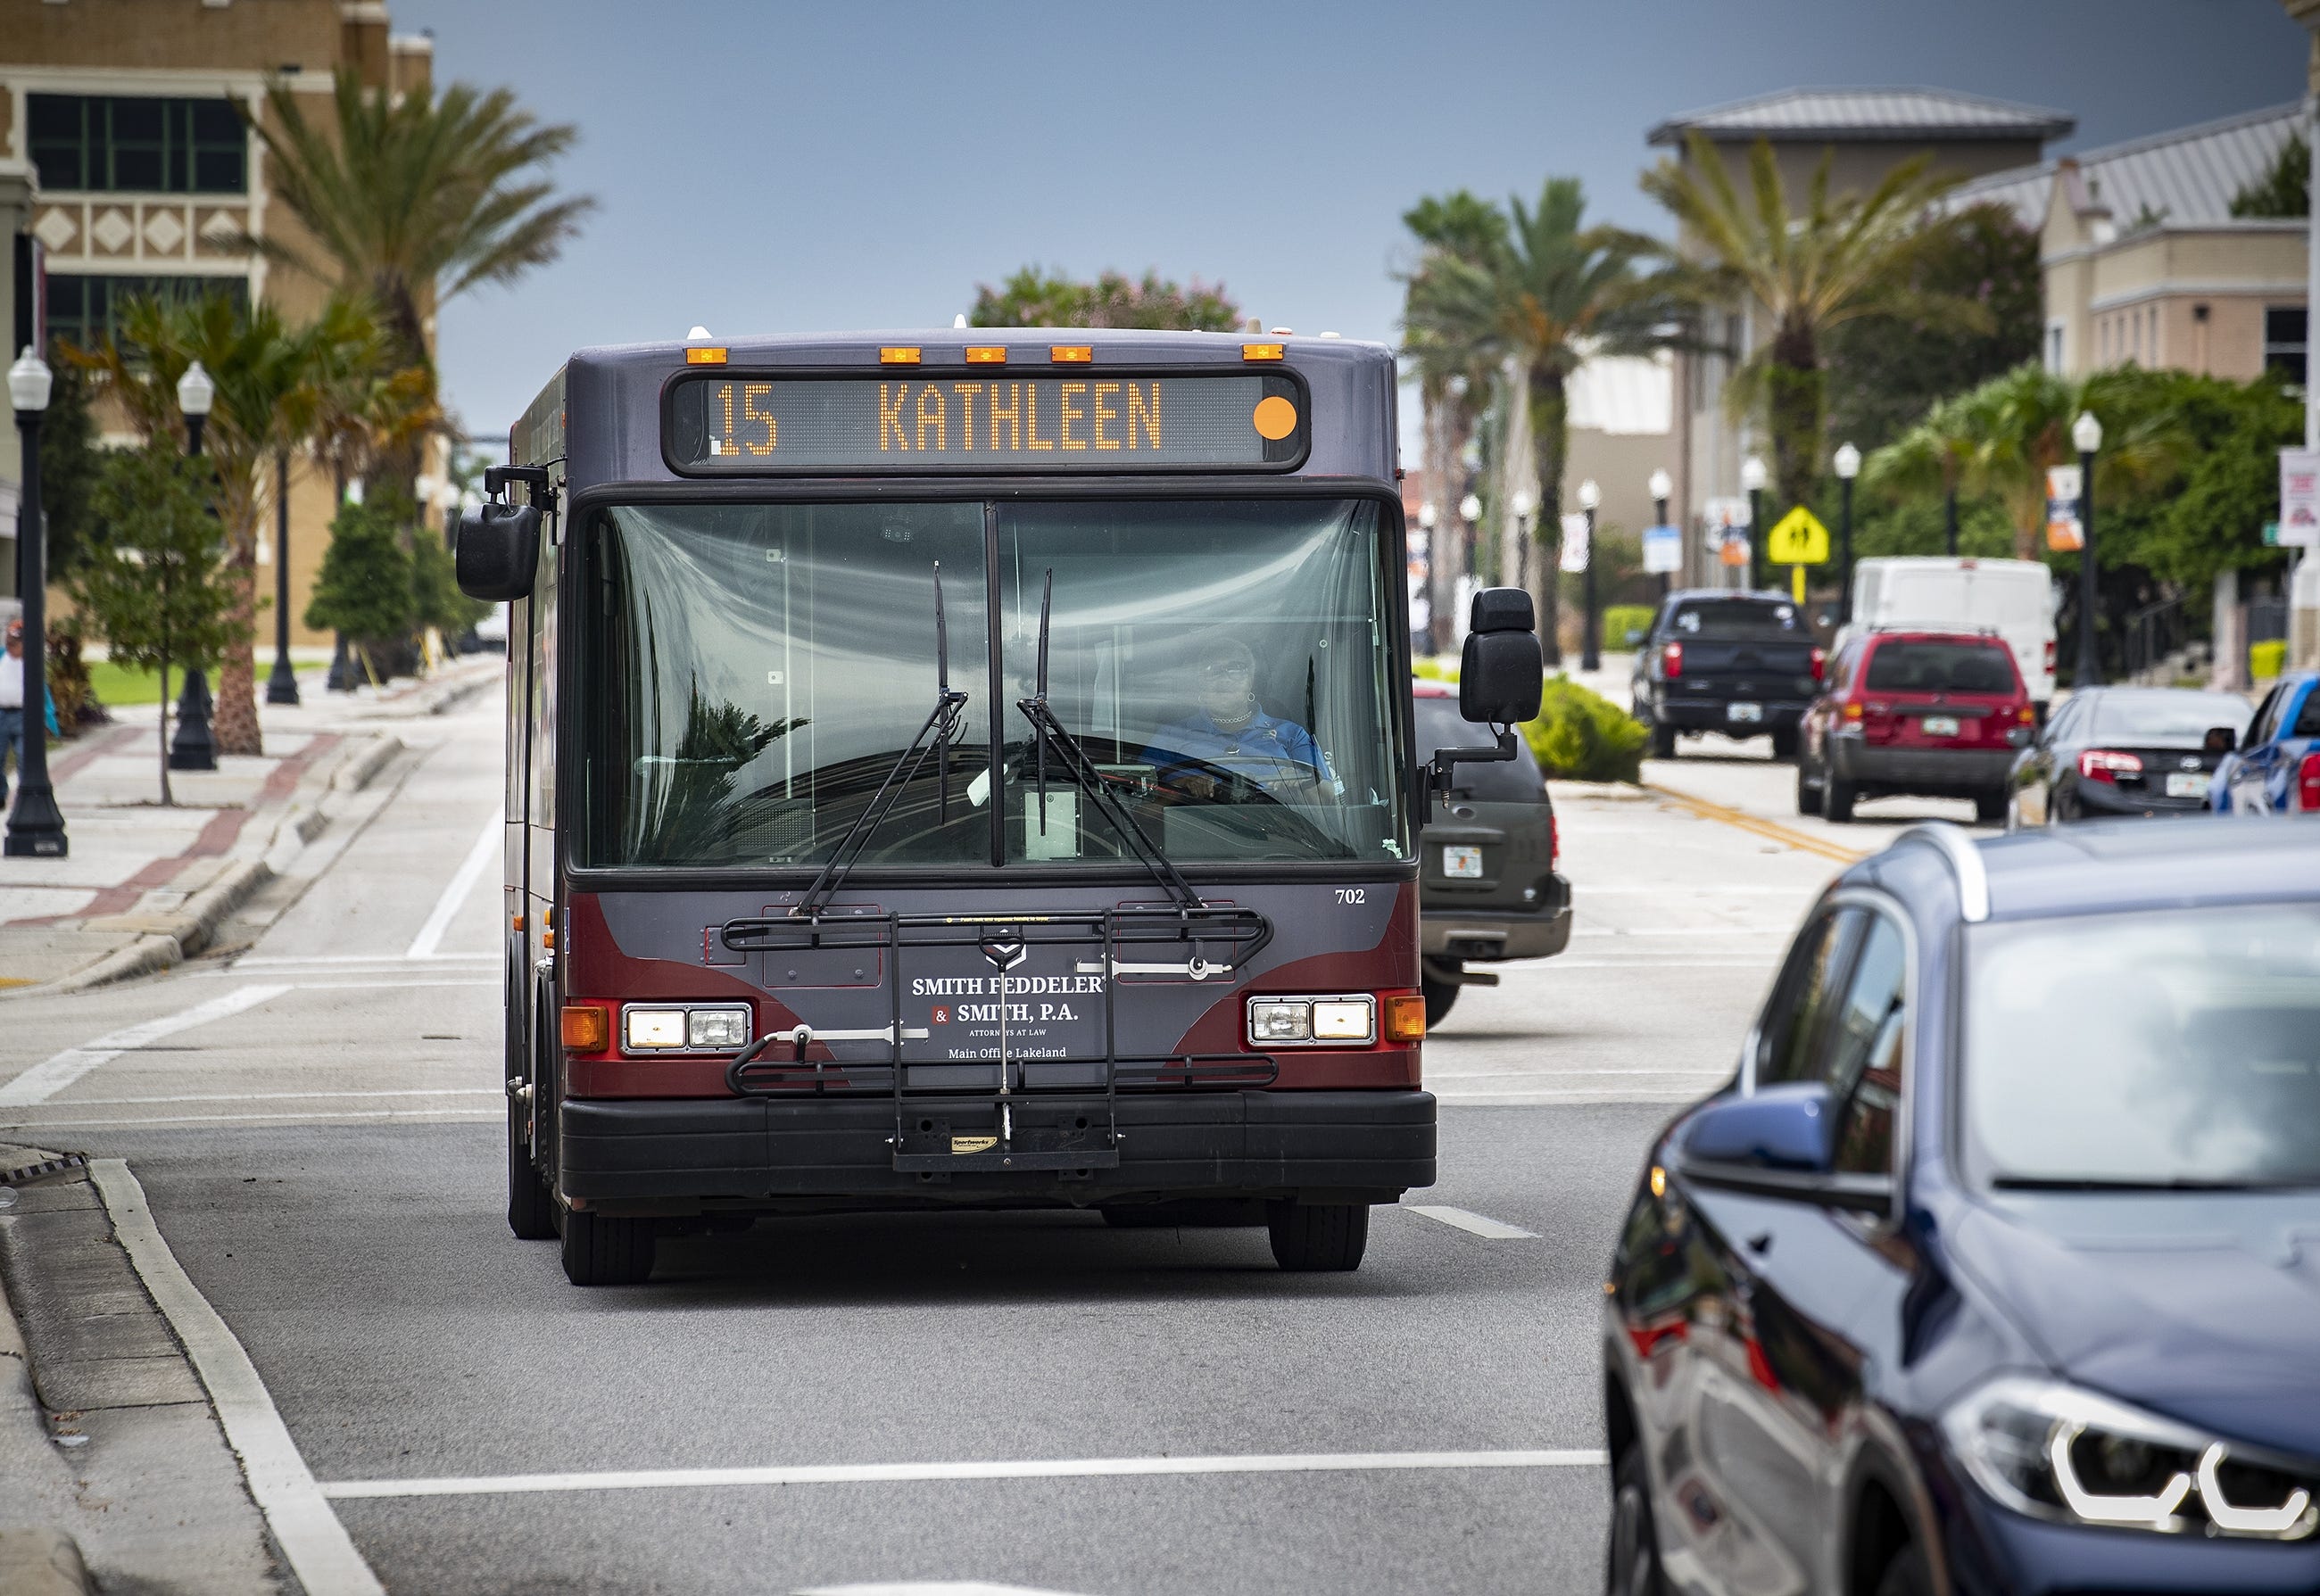 Mobile ticket app, WiFi coming to Lakeland's buses